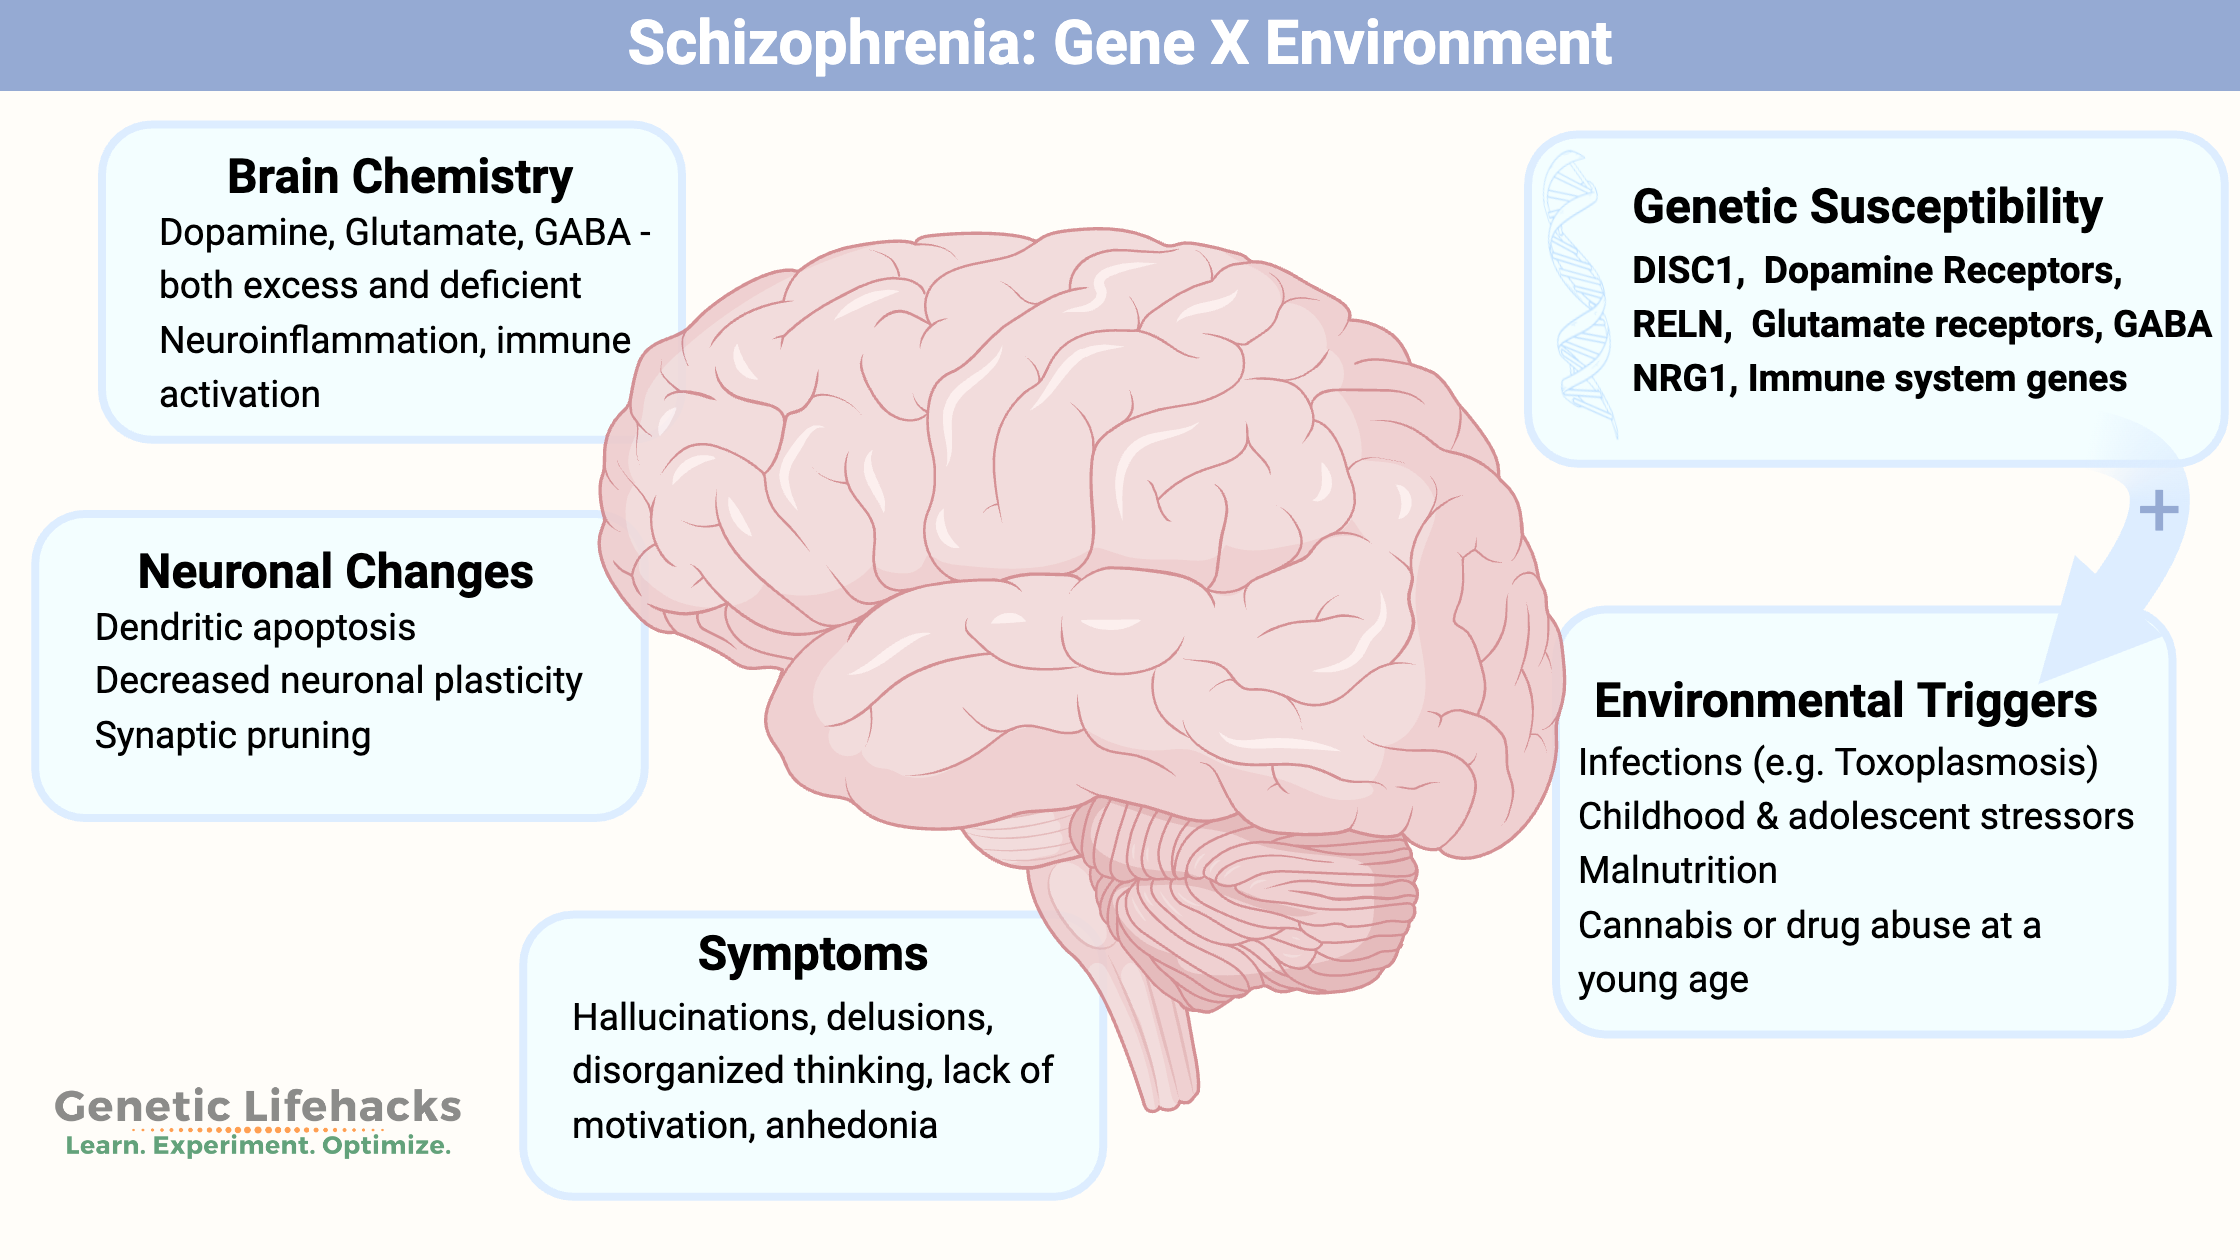 Graphical overview of the genetic and environmental factors involved in schizophrenia